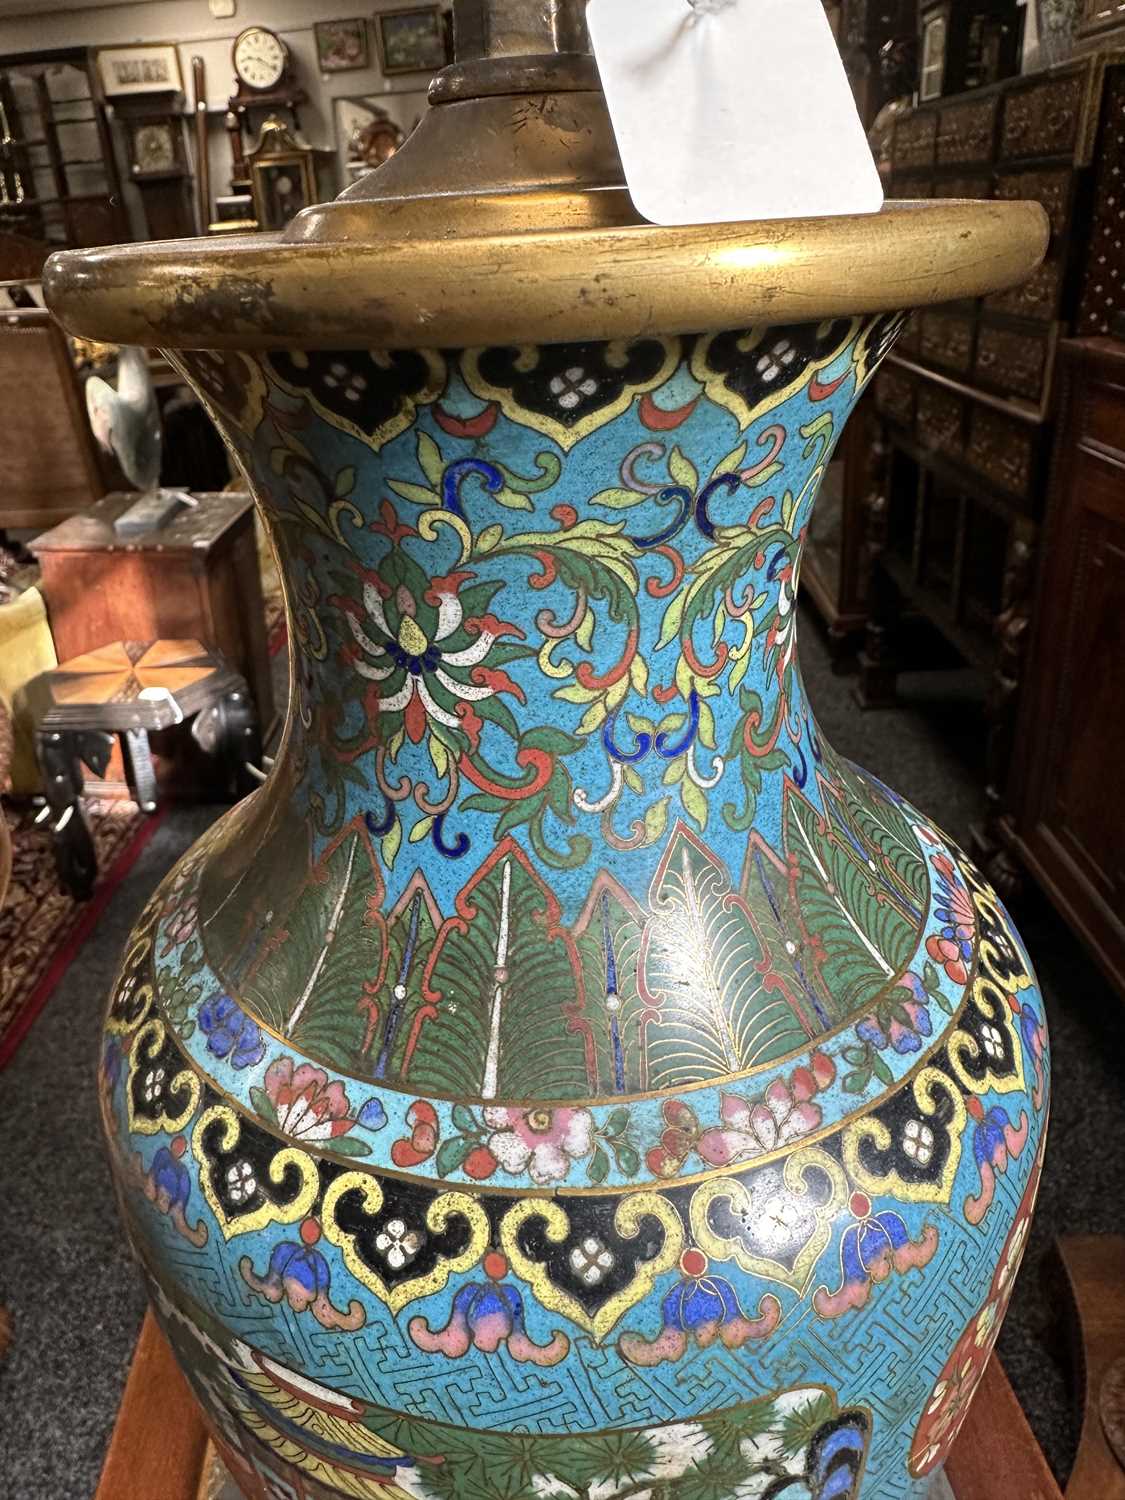 A LATE 19TH/EARLY 20TH CENTURY CENTURY CHINESE CLOISONNE VASE LAMP - Image 24 of 34